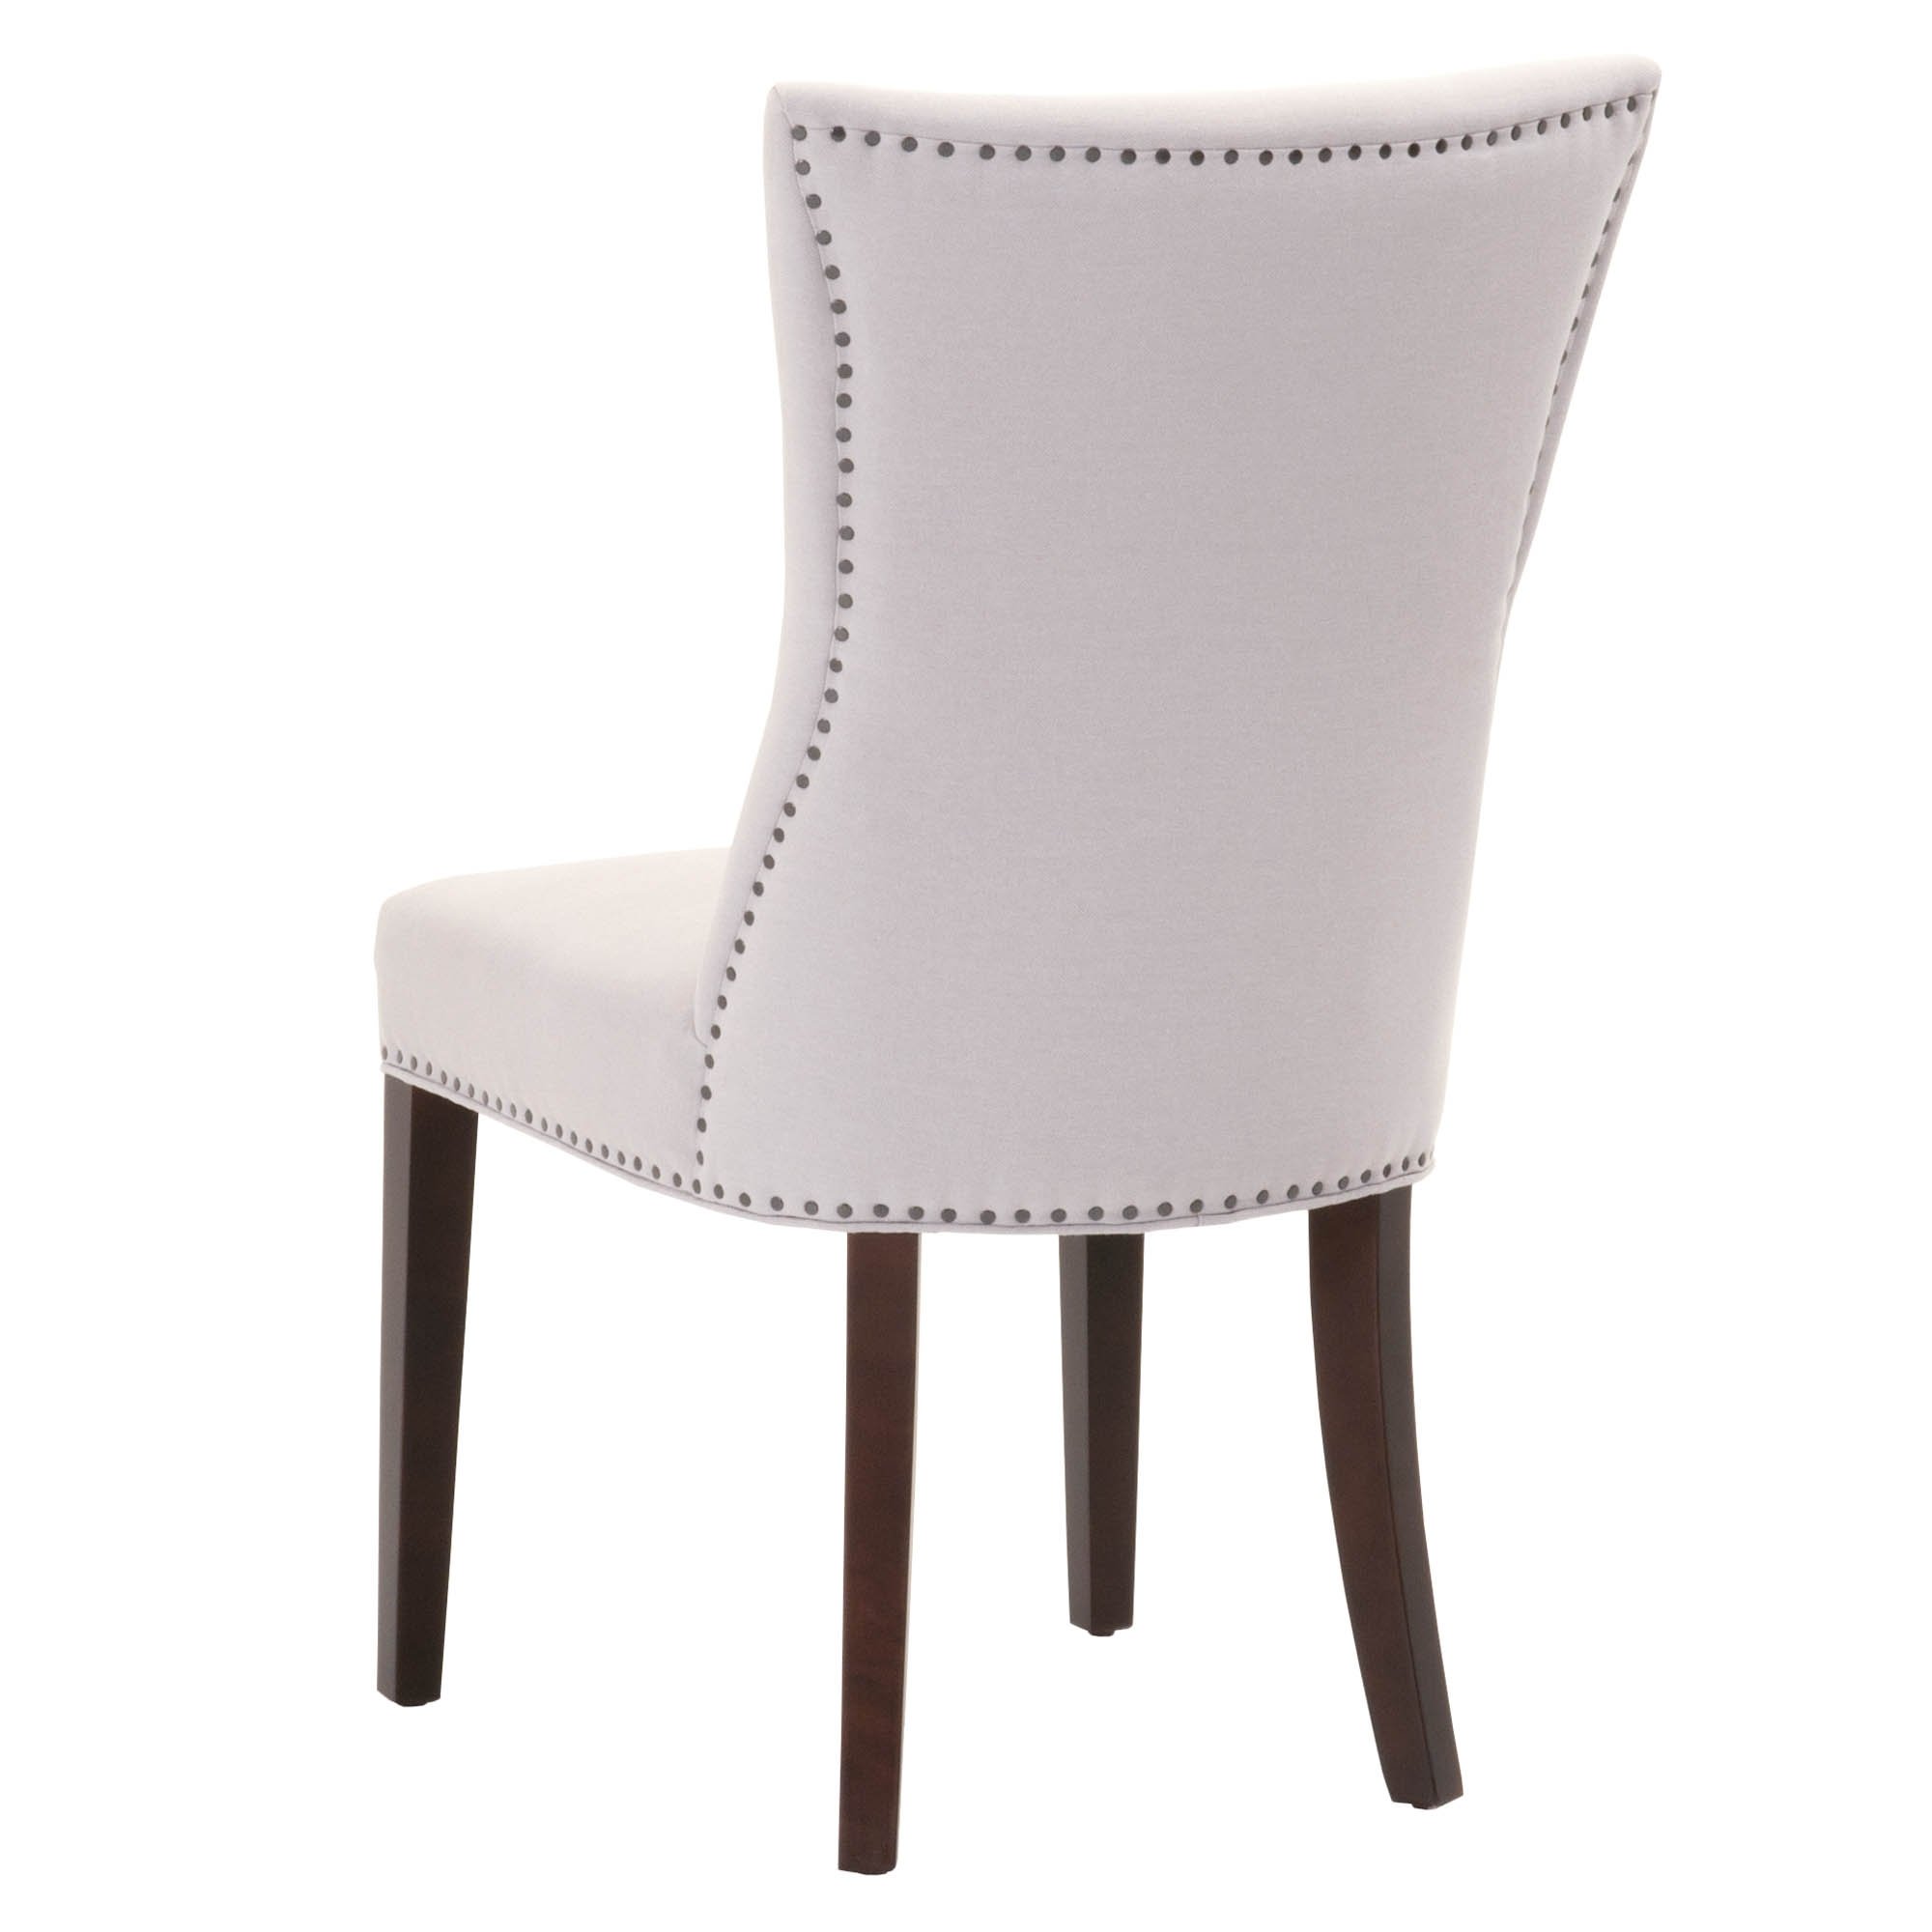 Avery Dining Chair, Set of 2 - Image 3